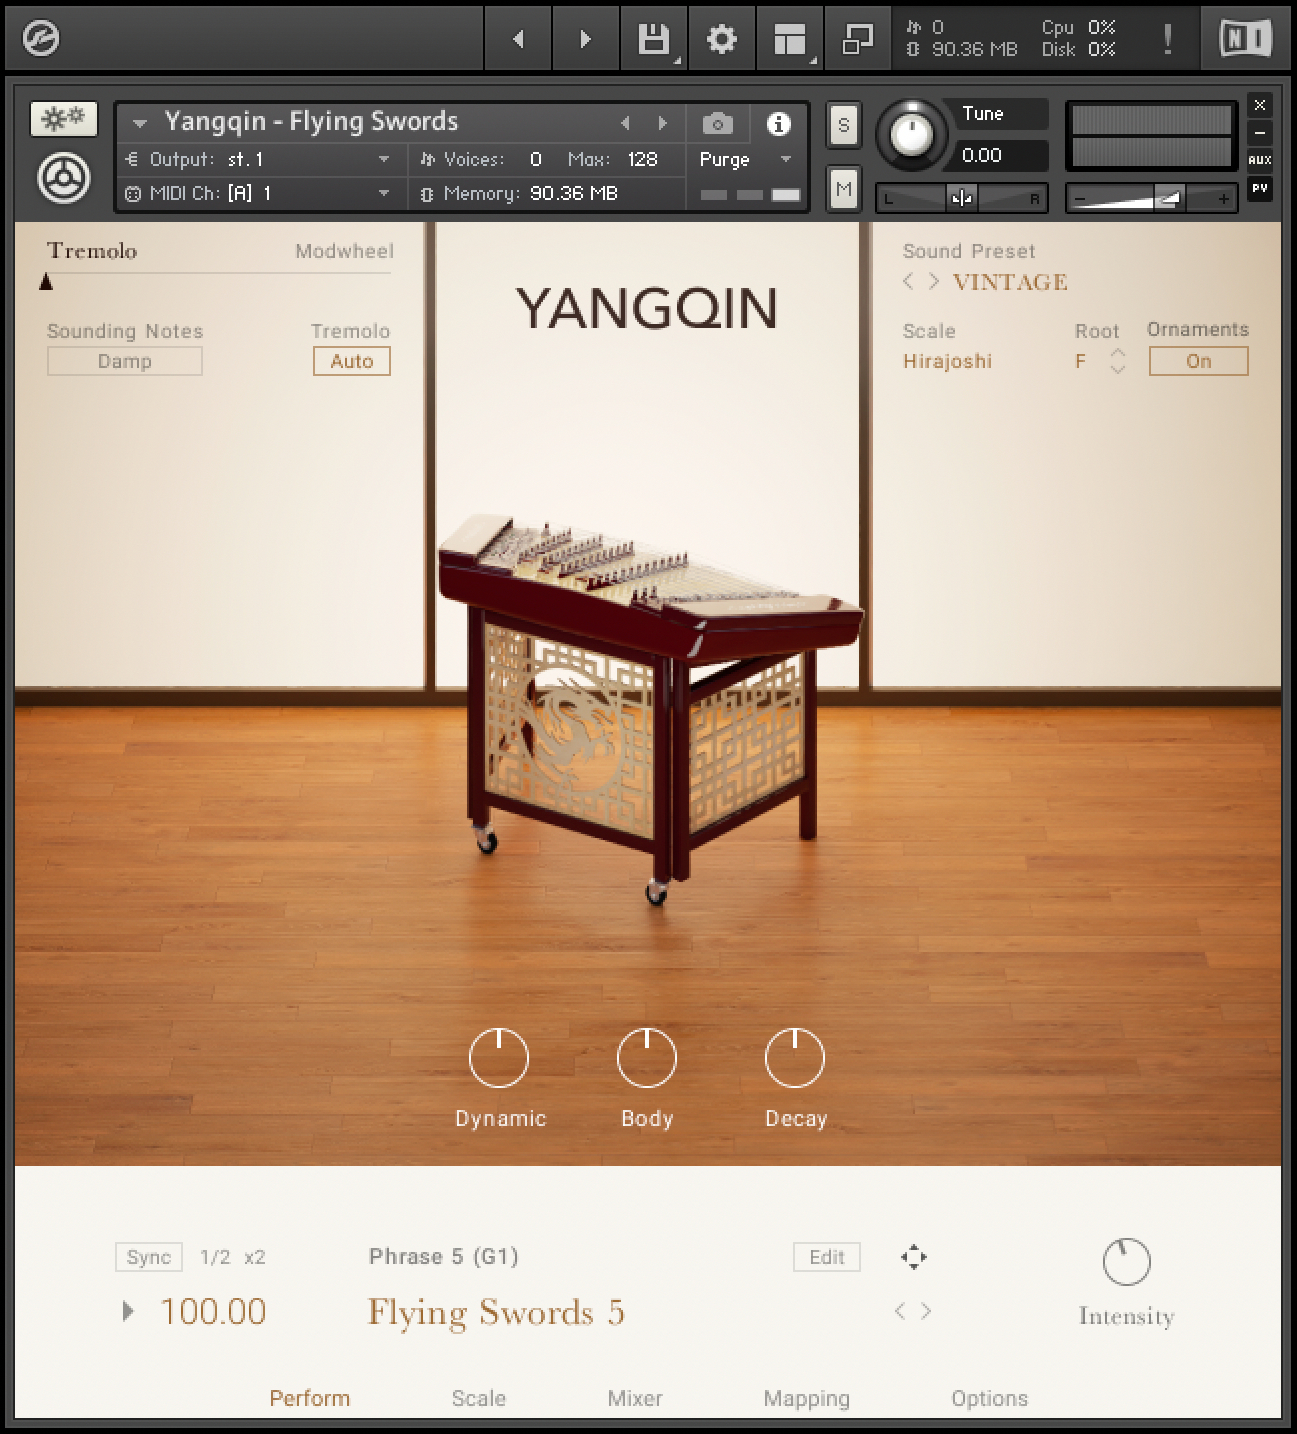 The Yangqin instrument interface after pressing the Minimize View button. Only the instrument interface and the Kontakt Player header are visible.